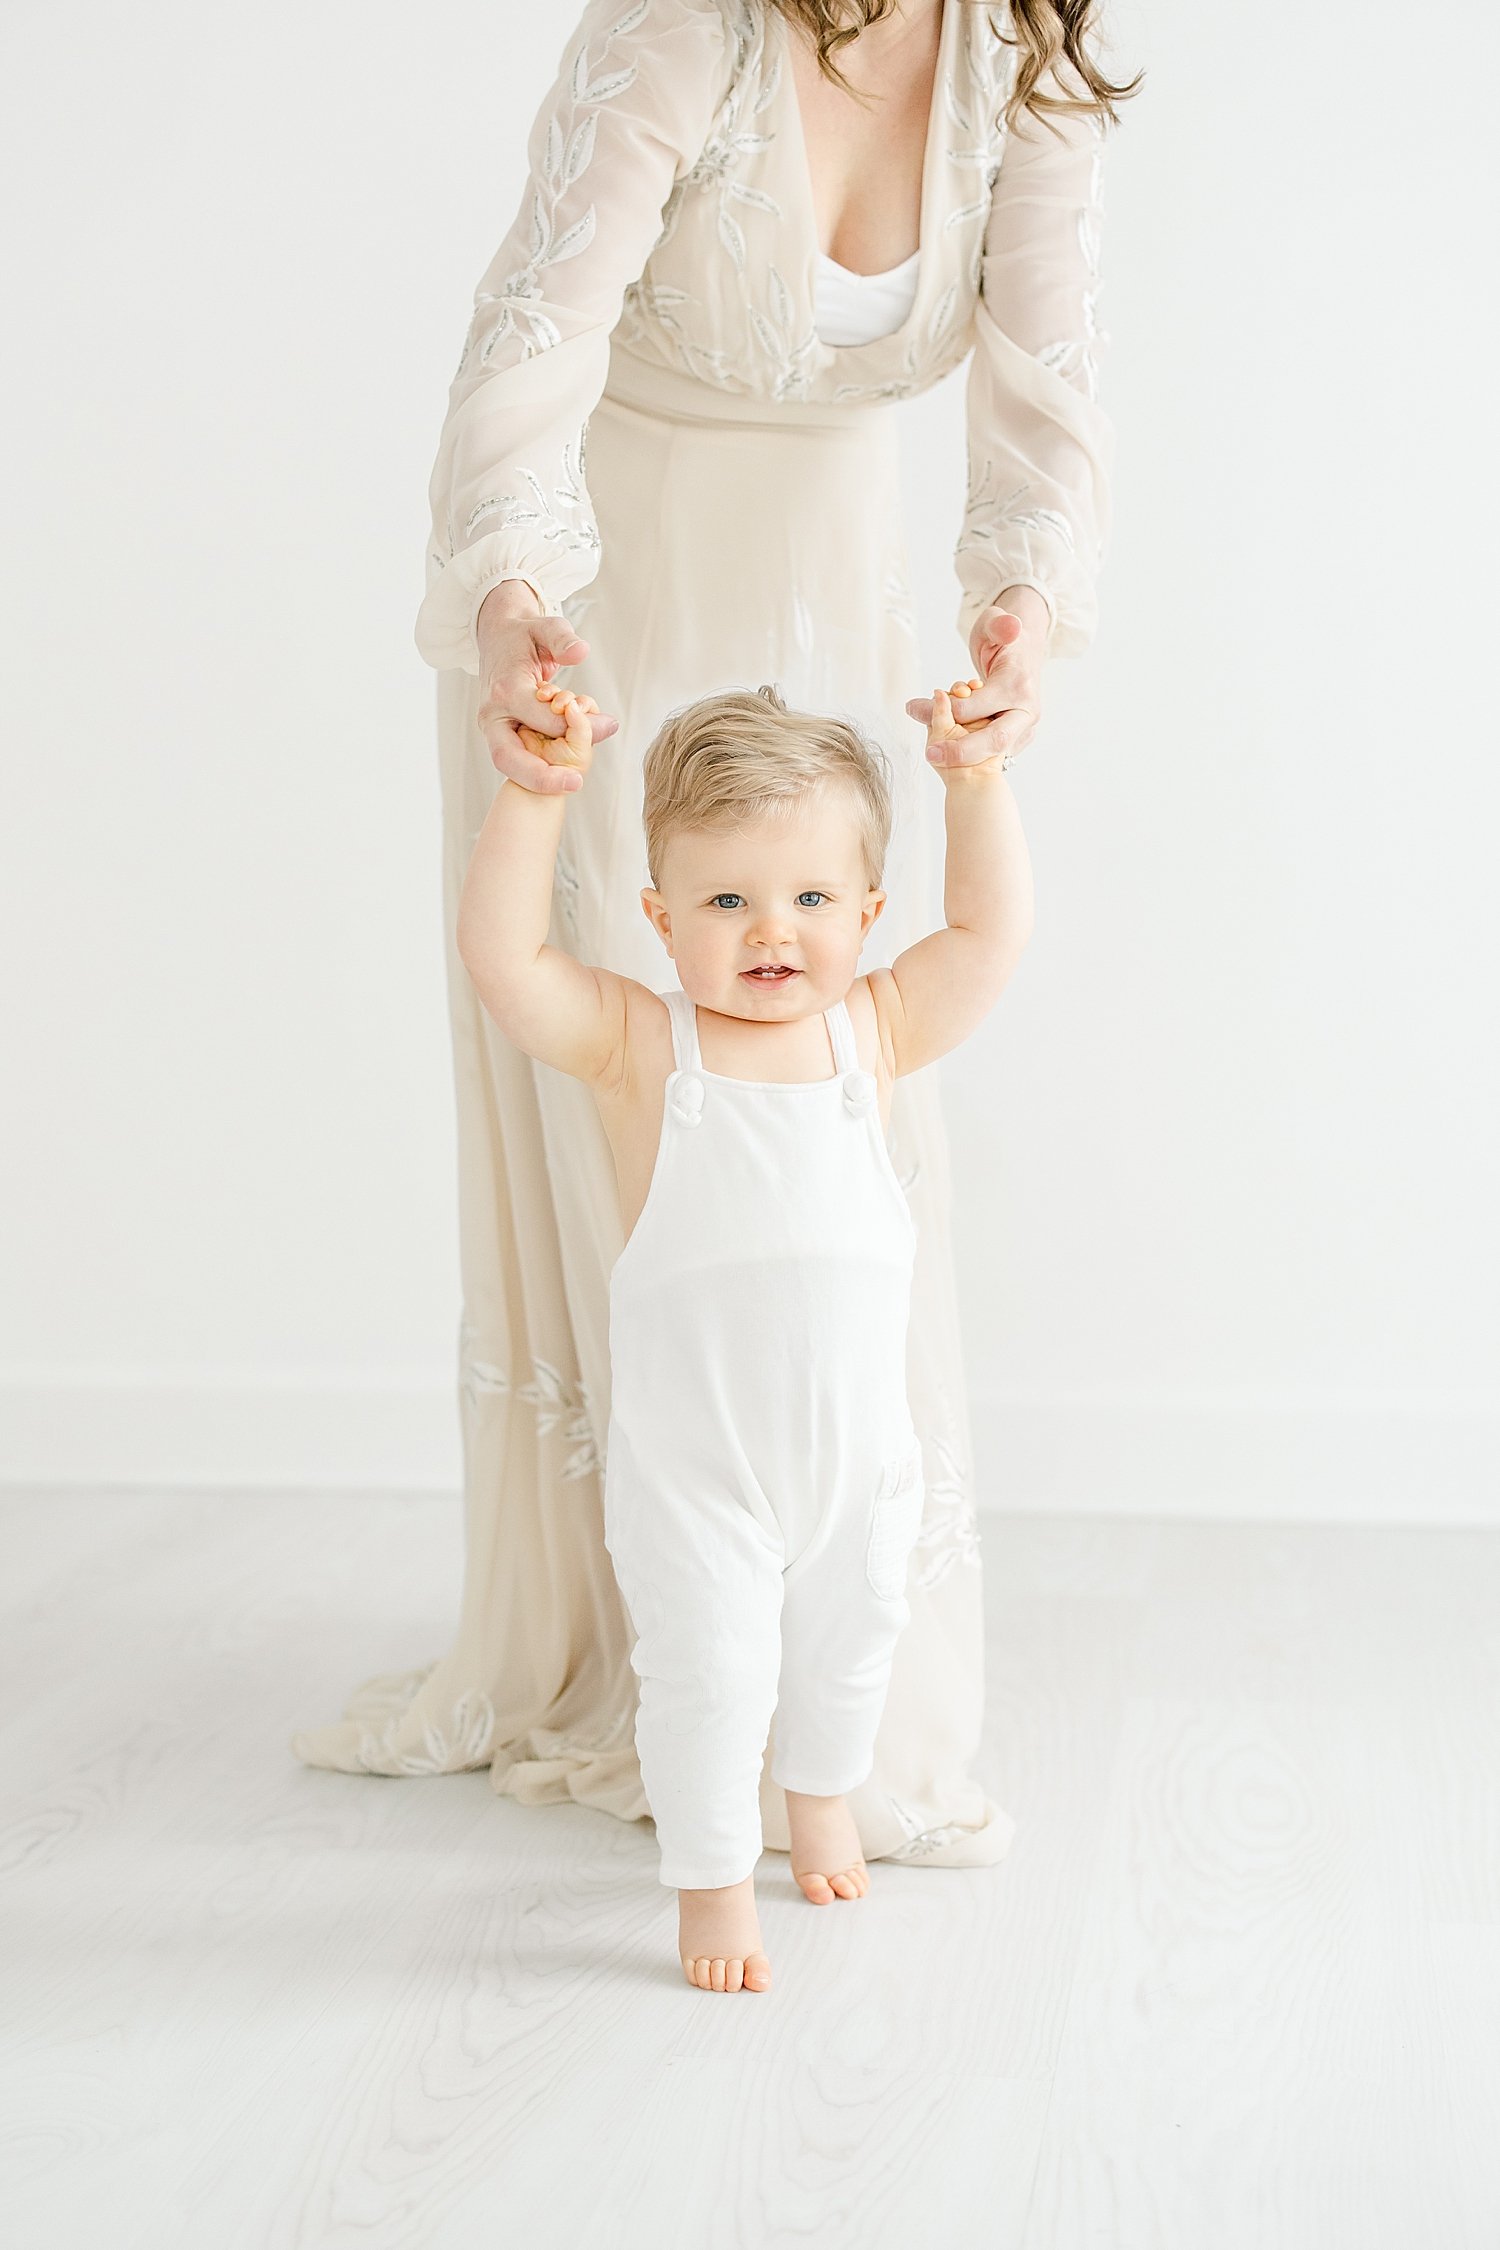 One year old little boy holding his Moms hands walking. Photo by Kristin Wood Photography.